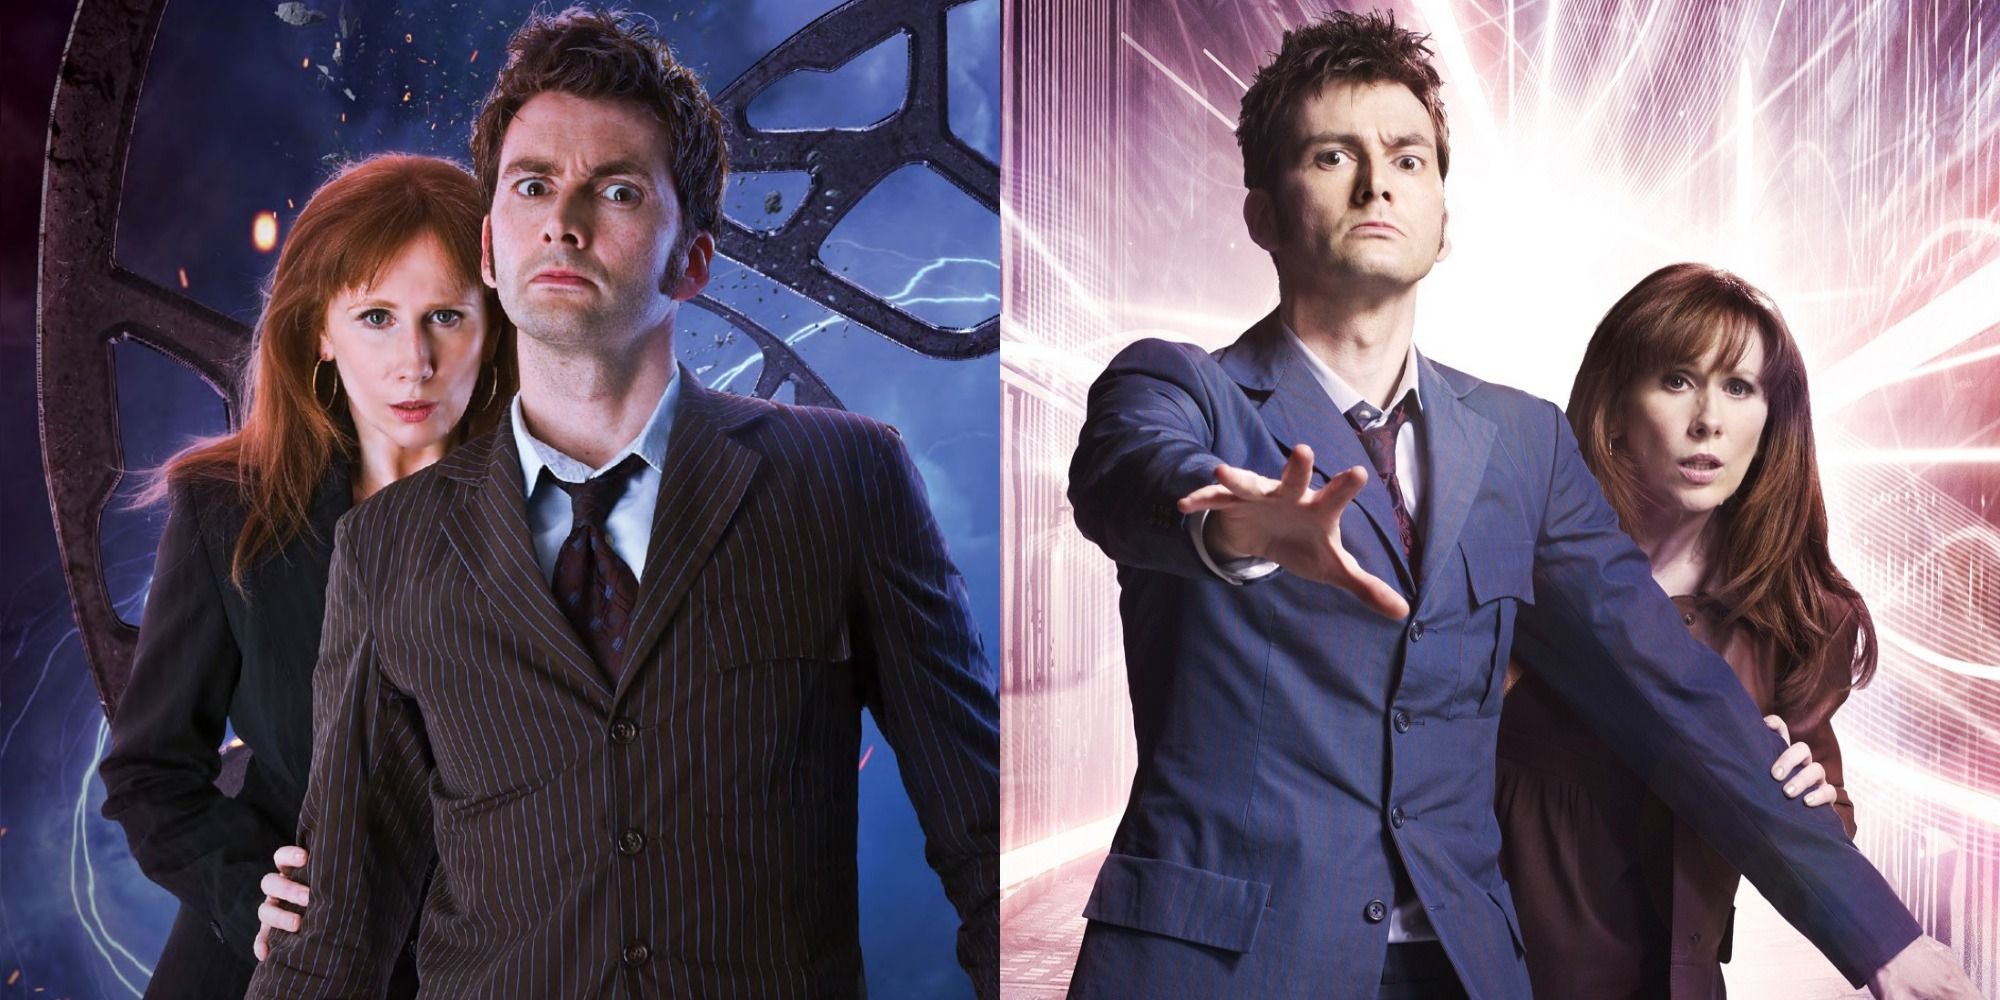 Split image - 10th Doctor and Donna standing in front of a window looking into space / 10th Doctor and Donna looking shocked in front of a background of pink light